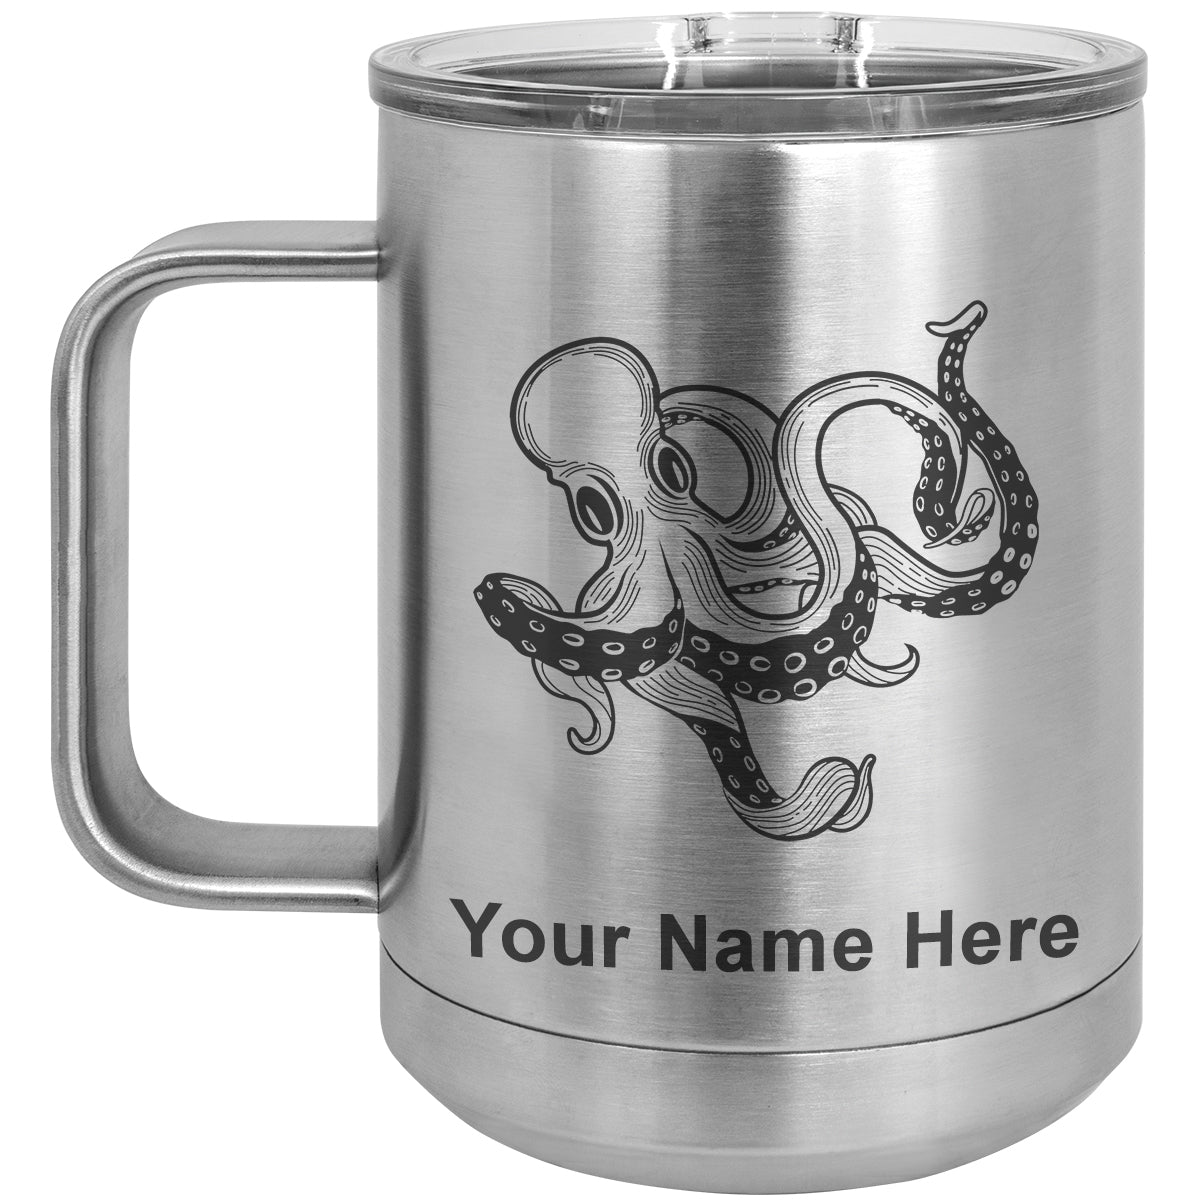 15oz Vacuum Insulated Coffee Mug, Kraken, Personalized Engraving Included